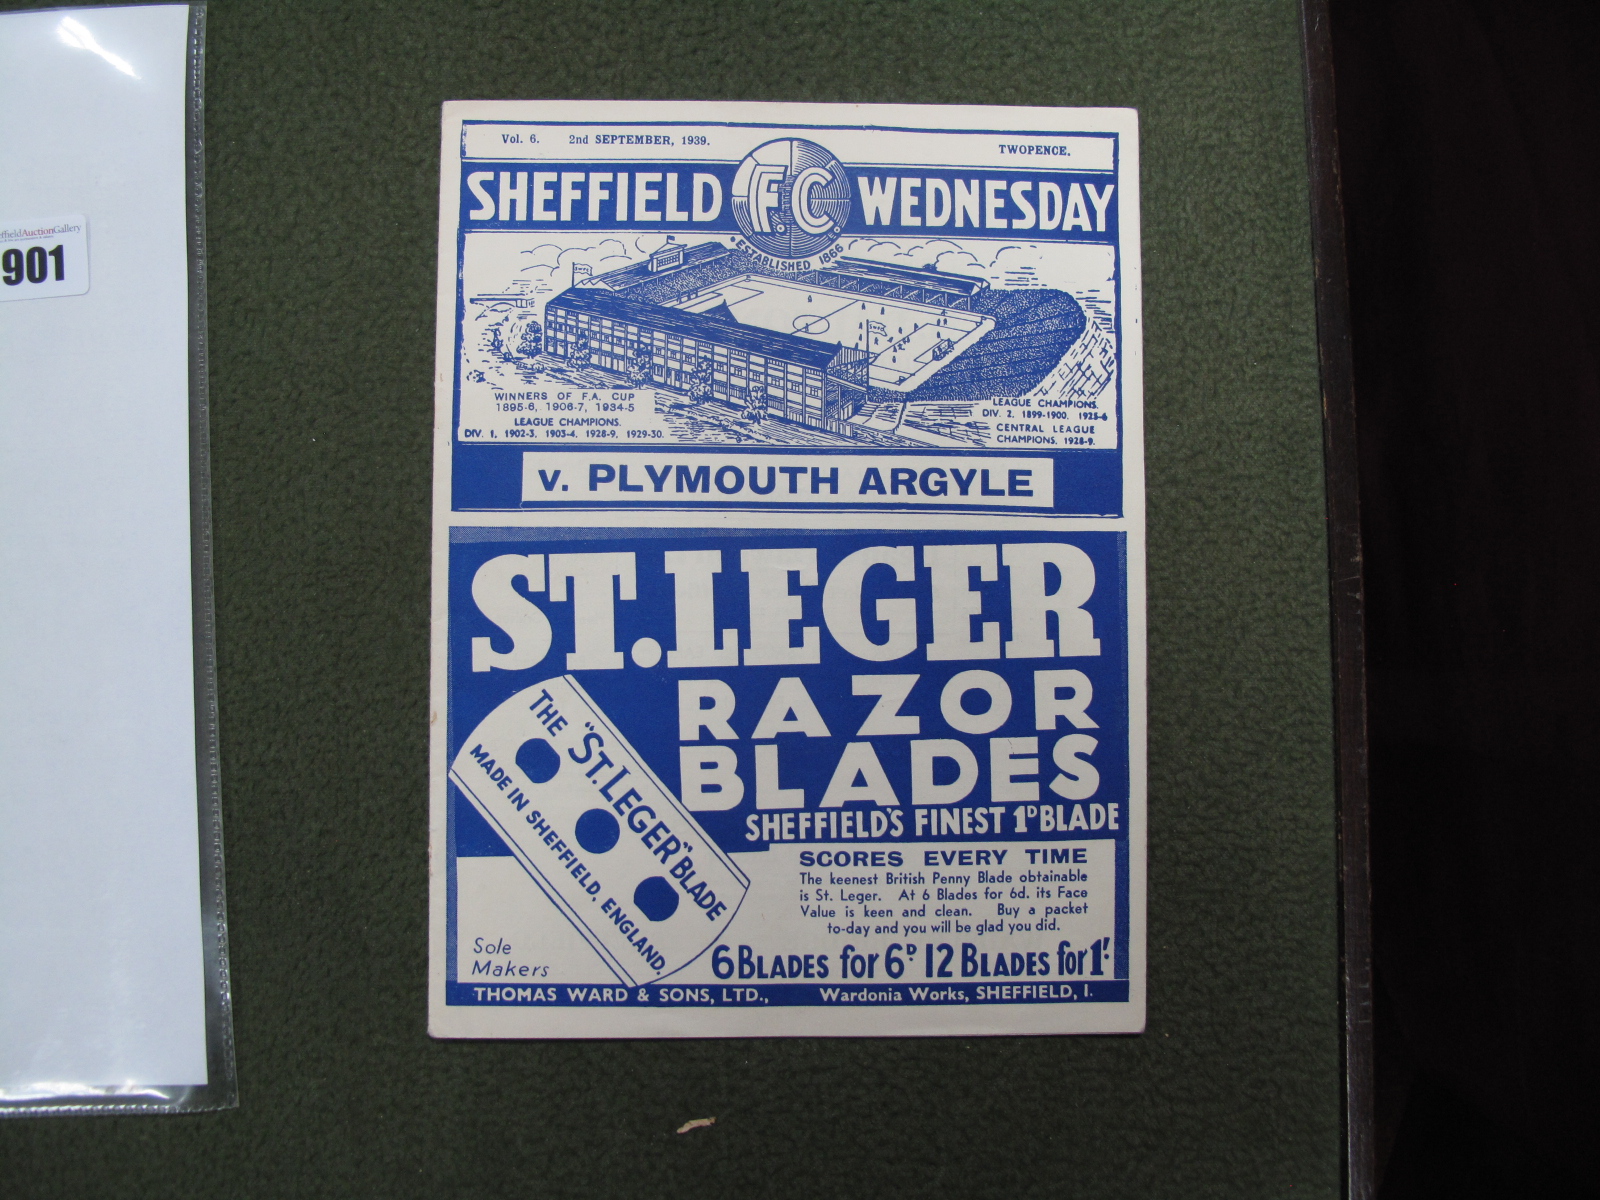 1939-40 Sheffield Wednesday V. Plymouth Argyle Programme Dated 2nd September 1939, last match before